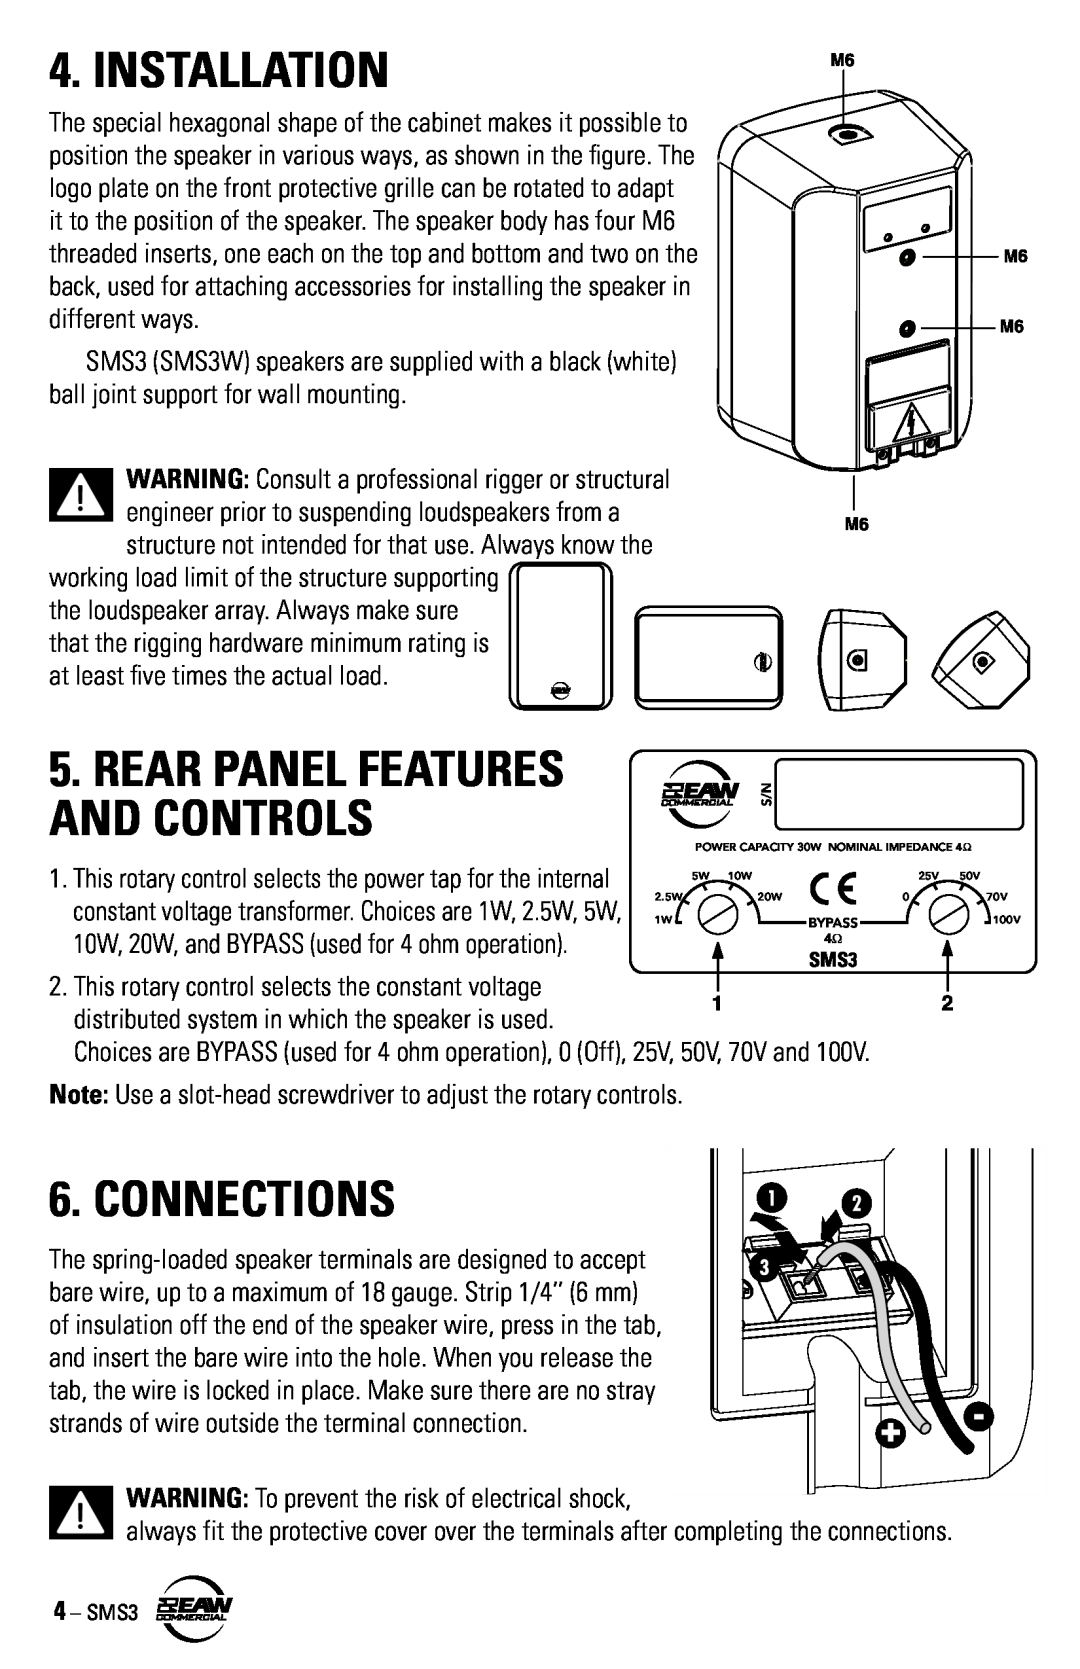 EAW SMS3 instruction manual Installation, Connections, Rear Panel Features And Controls 